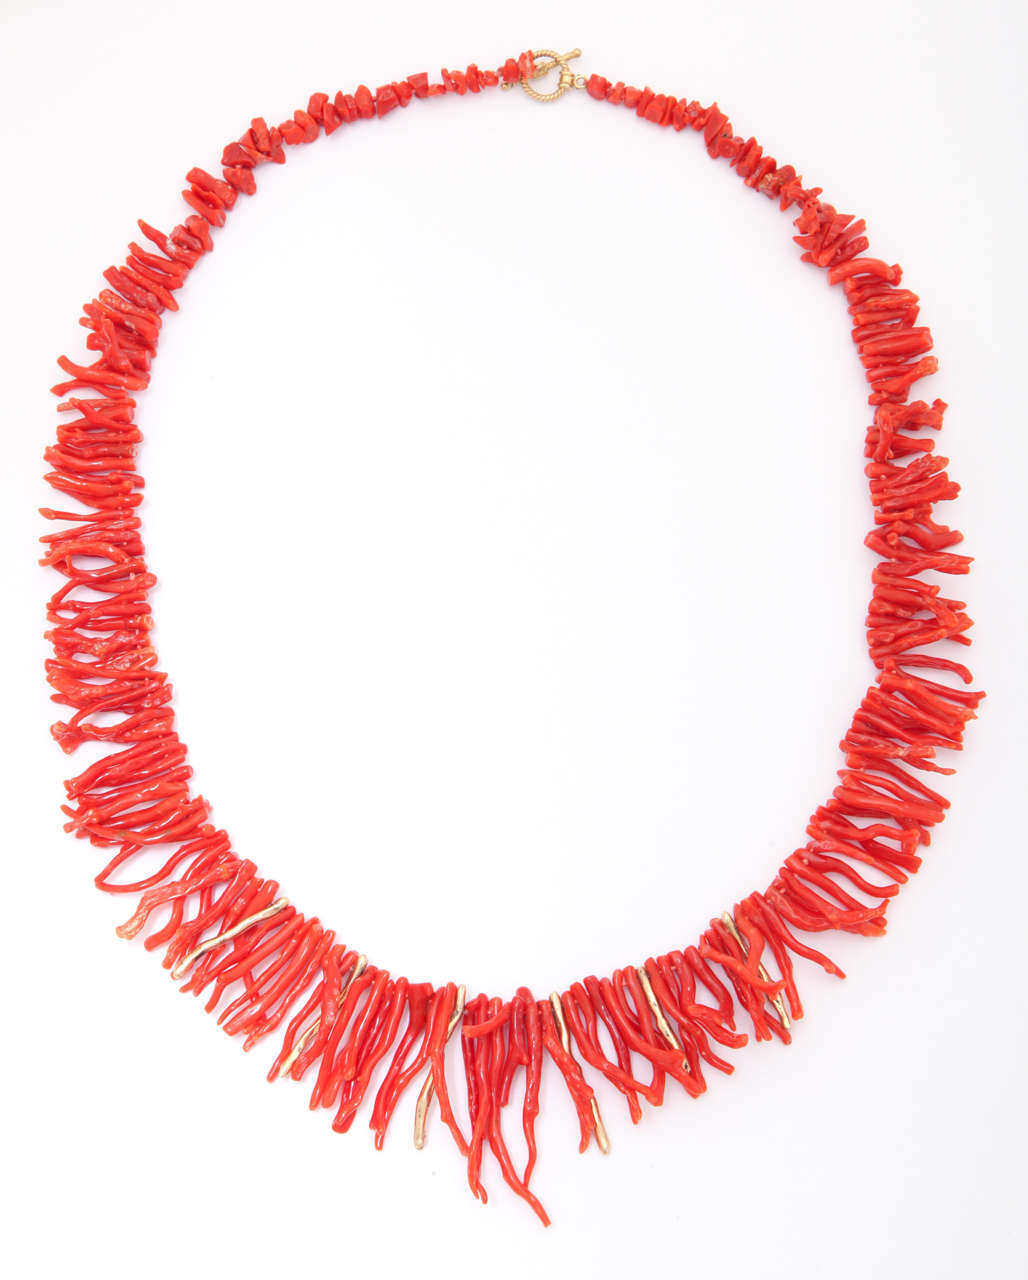 Classical and now rare red branch coral from the Mediterranean Sea. The coral graduates from small to large, the larges branches are 1 1/4 to 1 1/2 in. long. The total length of the necklace is 21 1/2 in. Interspersed in the center among the long